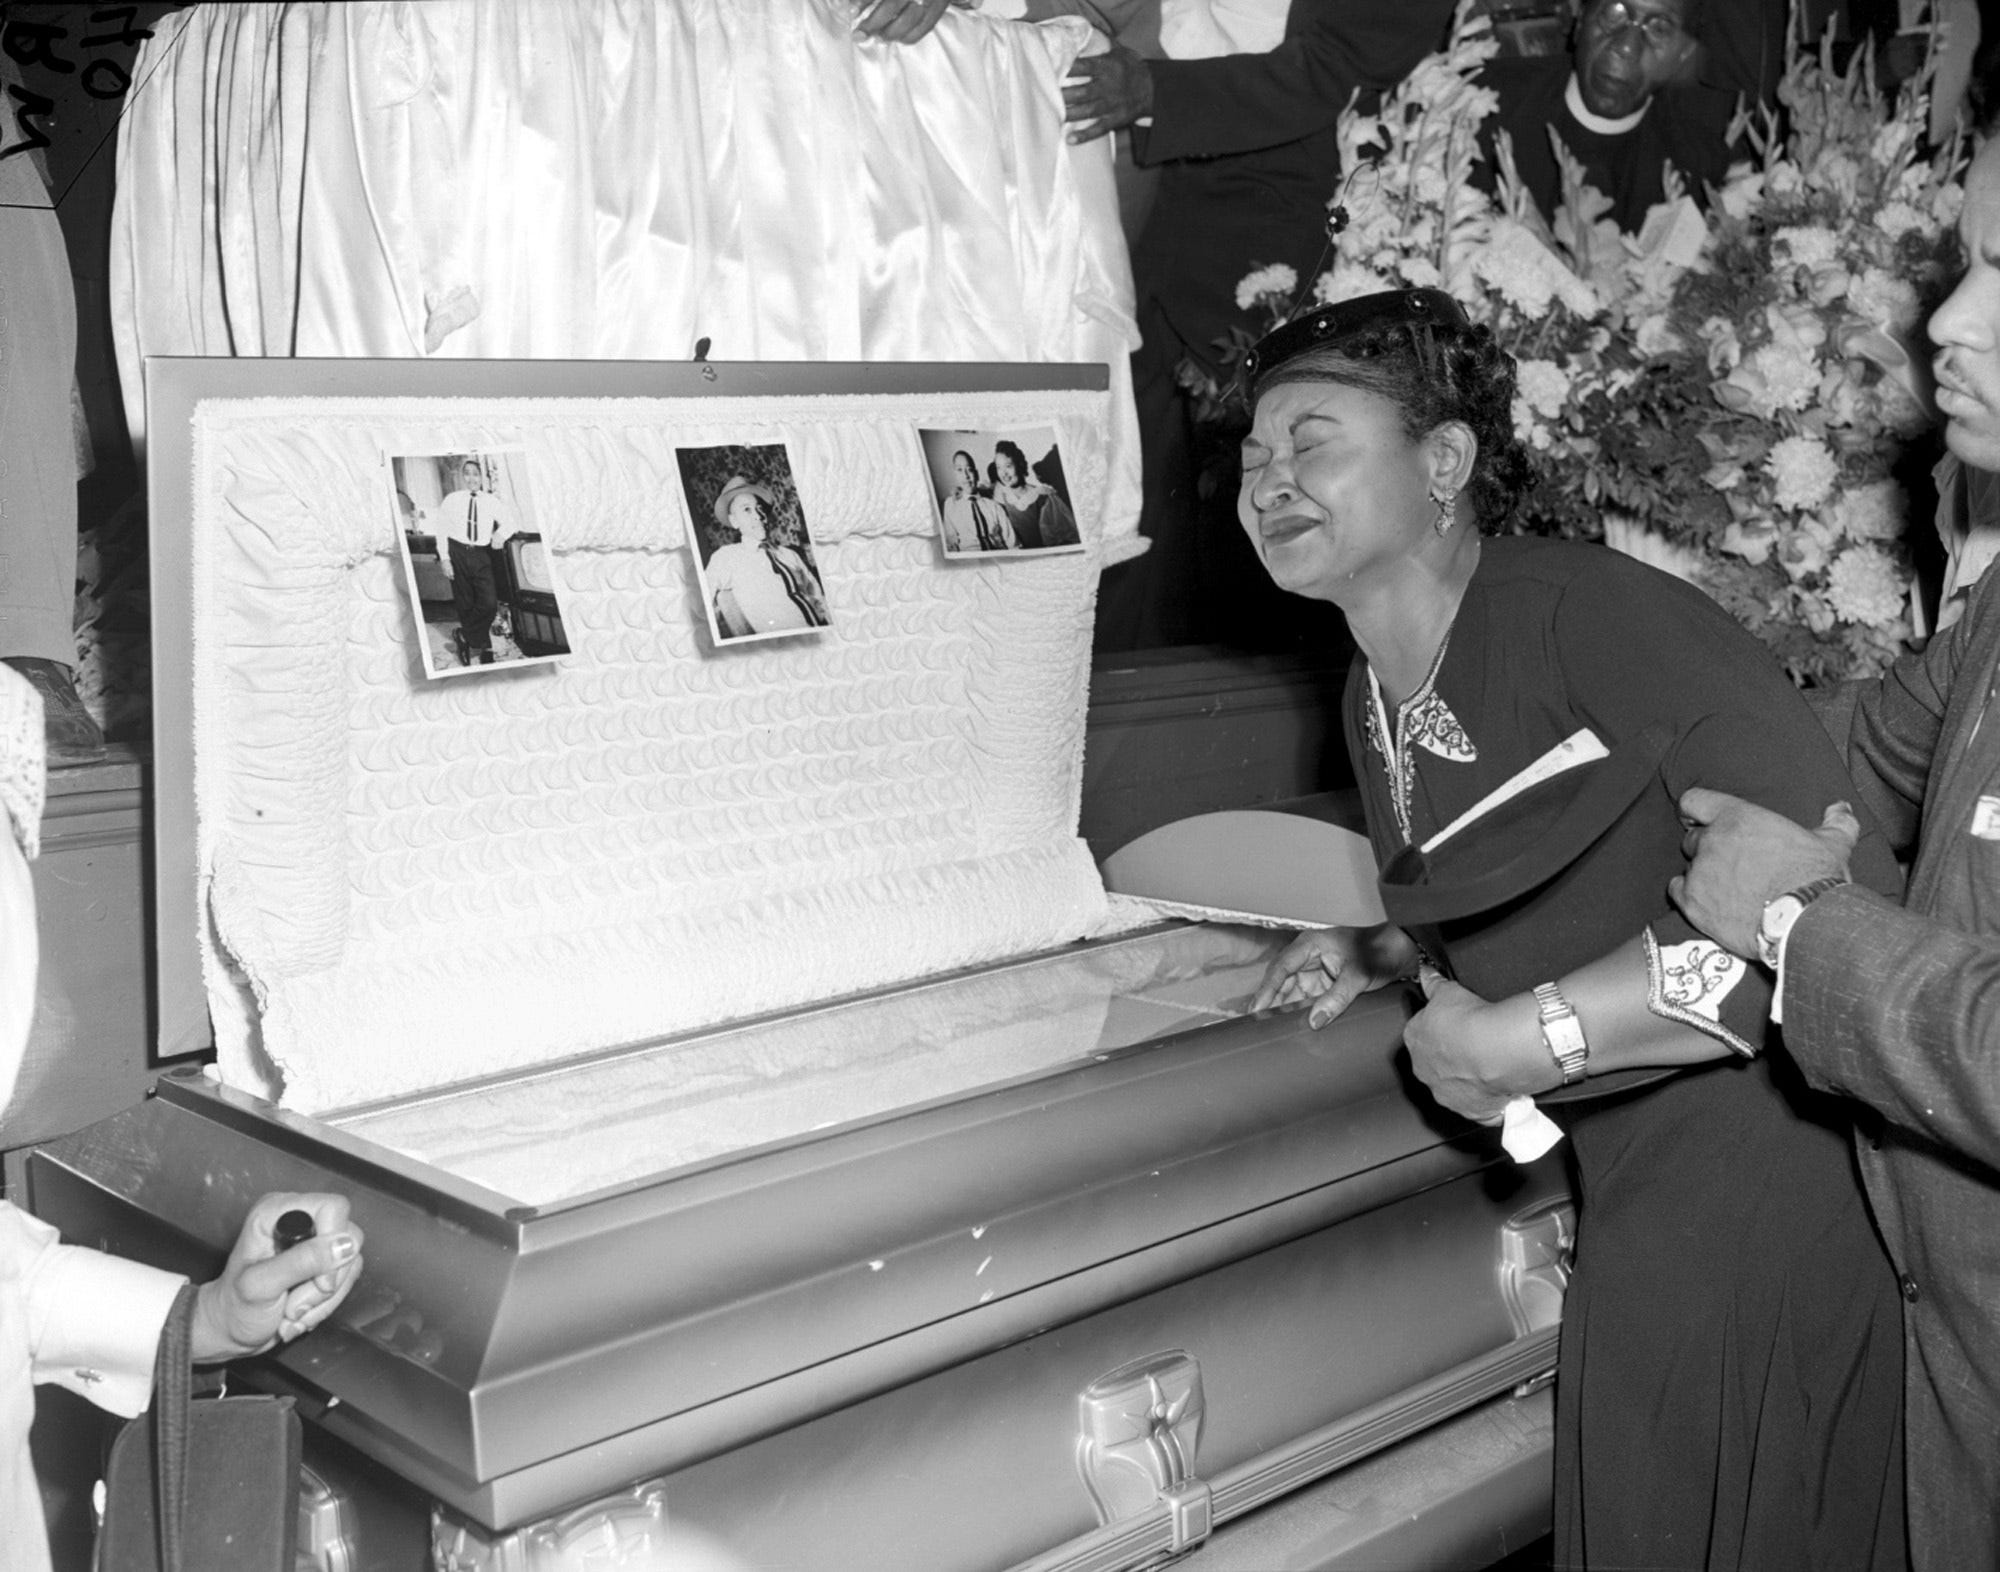 Mamie Till Mobley, mother of Emmett Till, weeps at her son's funeral in Chicago in 1955.